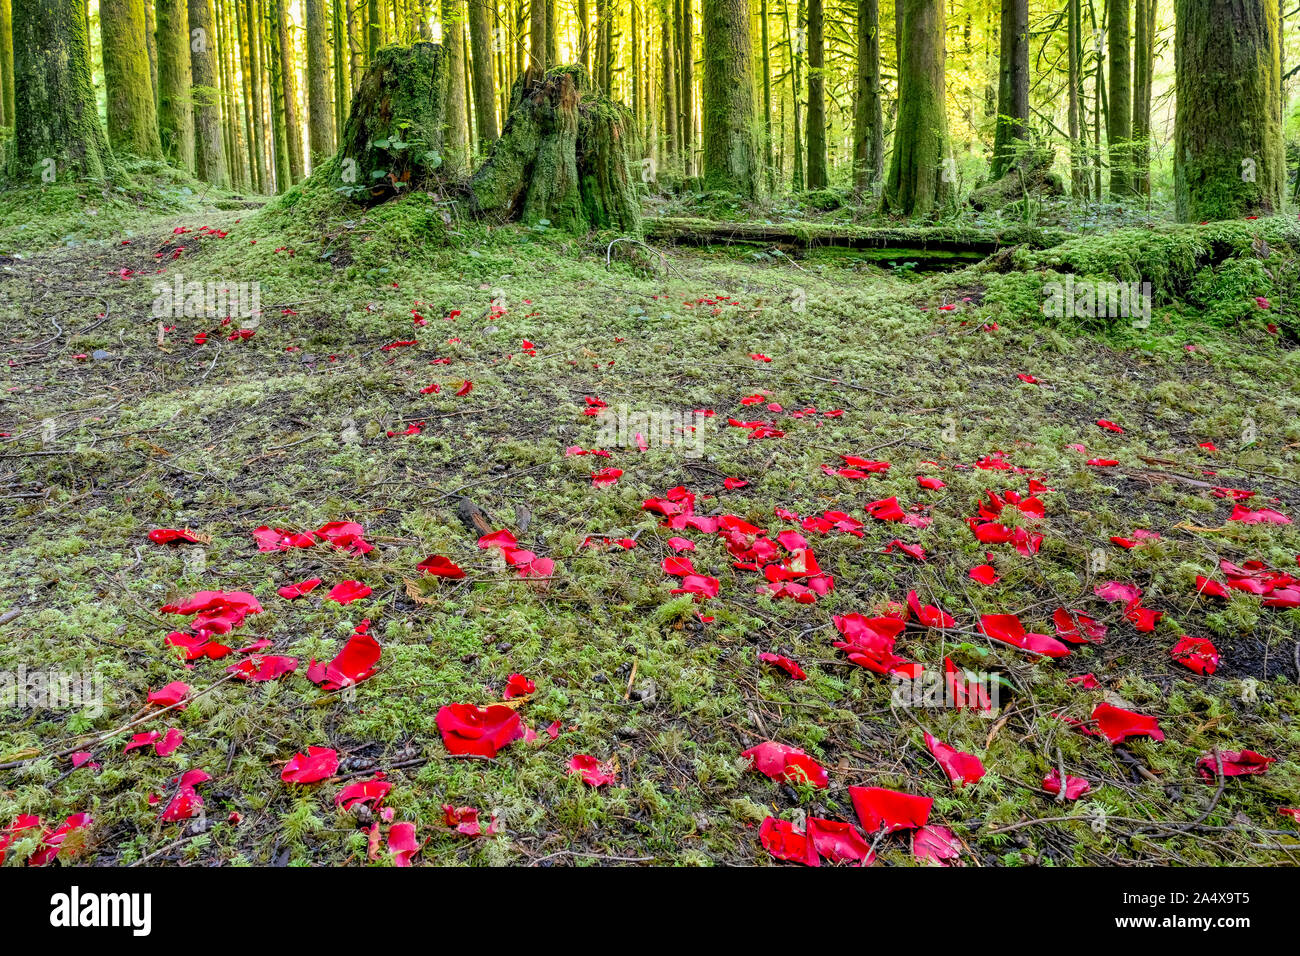 Rose petals scattered in forest, Golden Ears Provincial Park, Maple Ridge, British Columbia, Canada Stock Photo